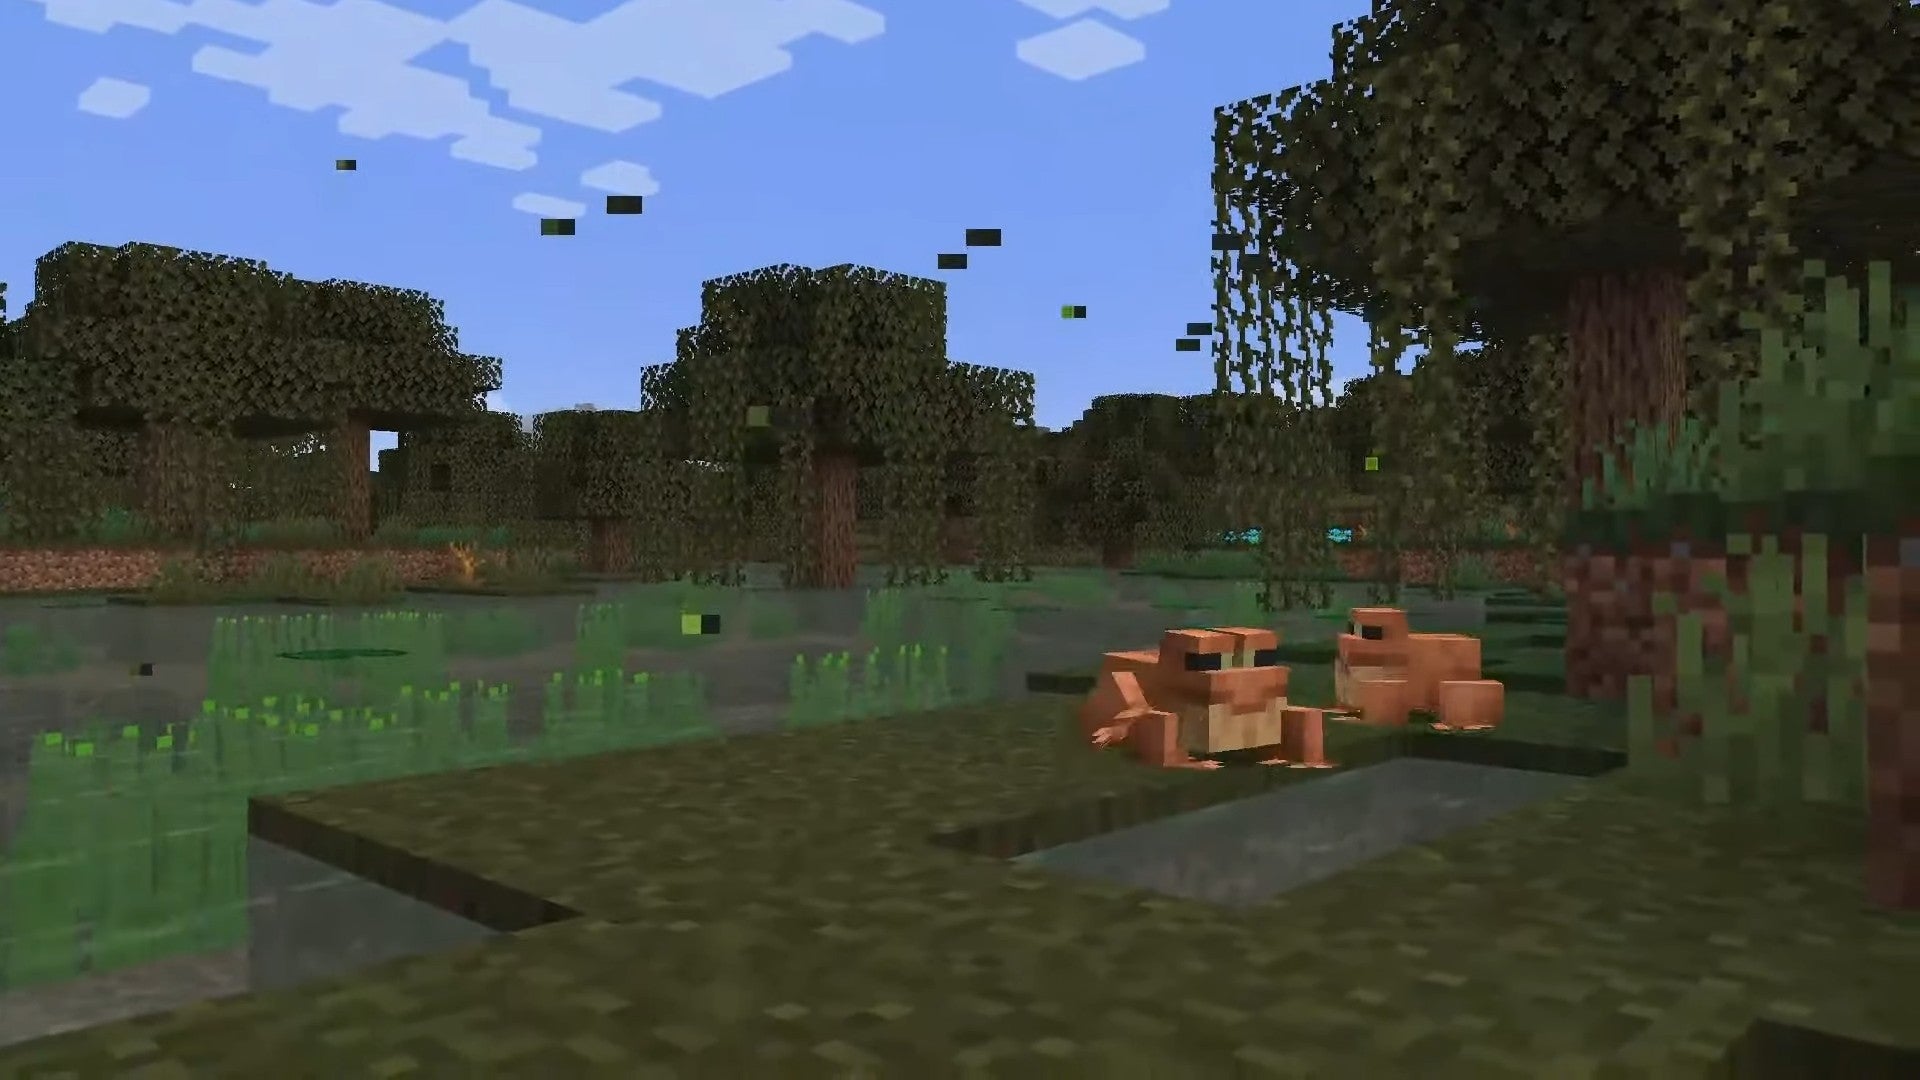 Two frogs sat in a swamp surrounded by fireflies in Minecraft